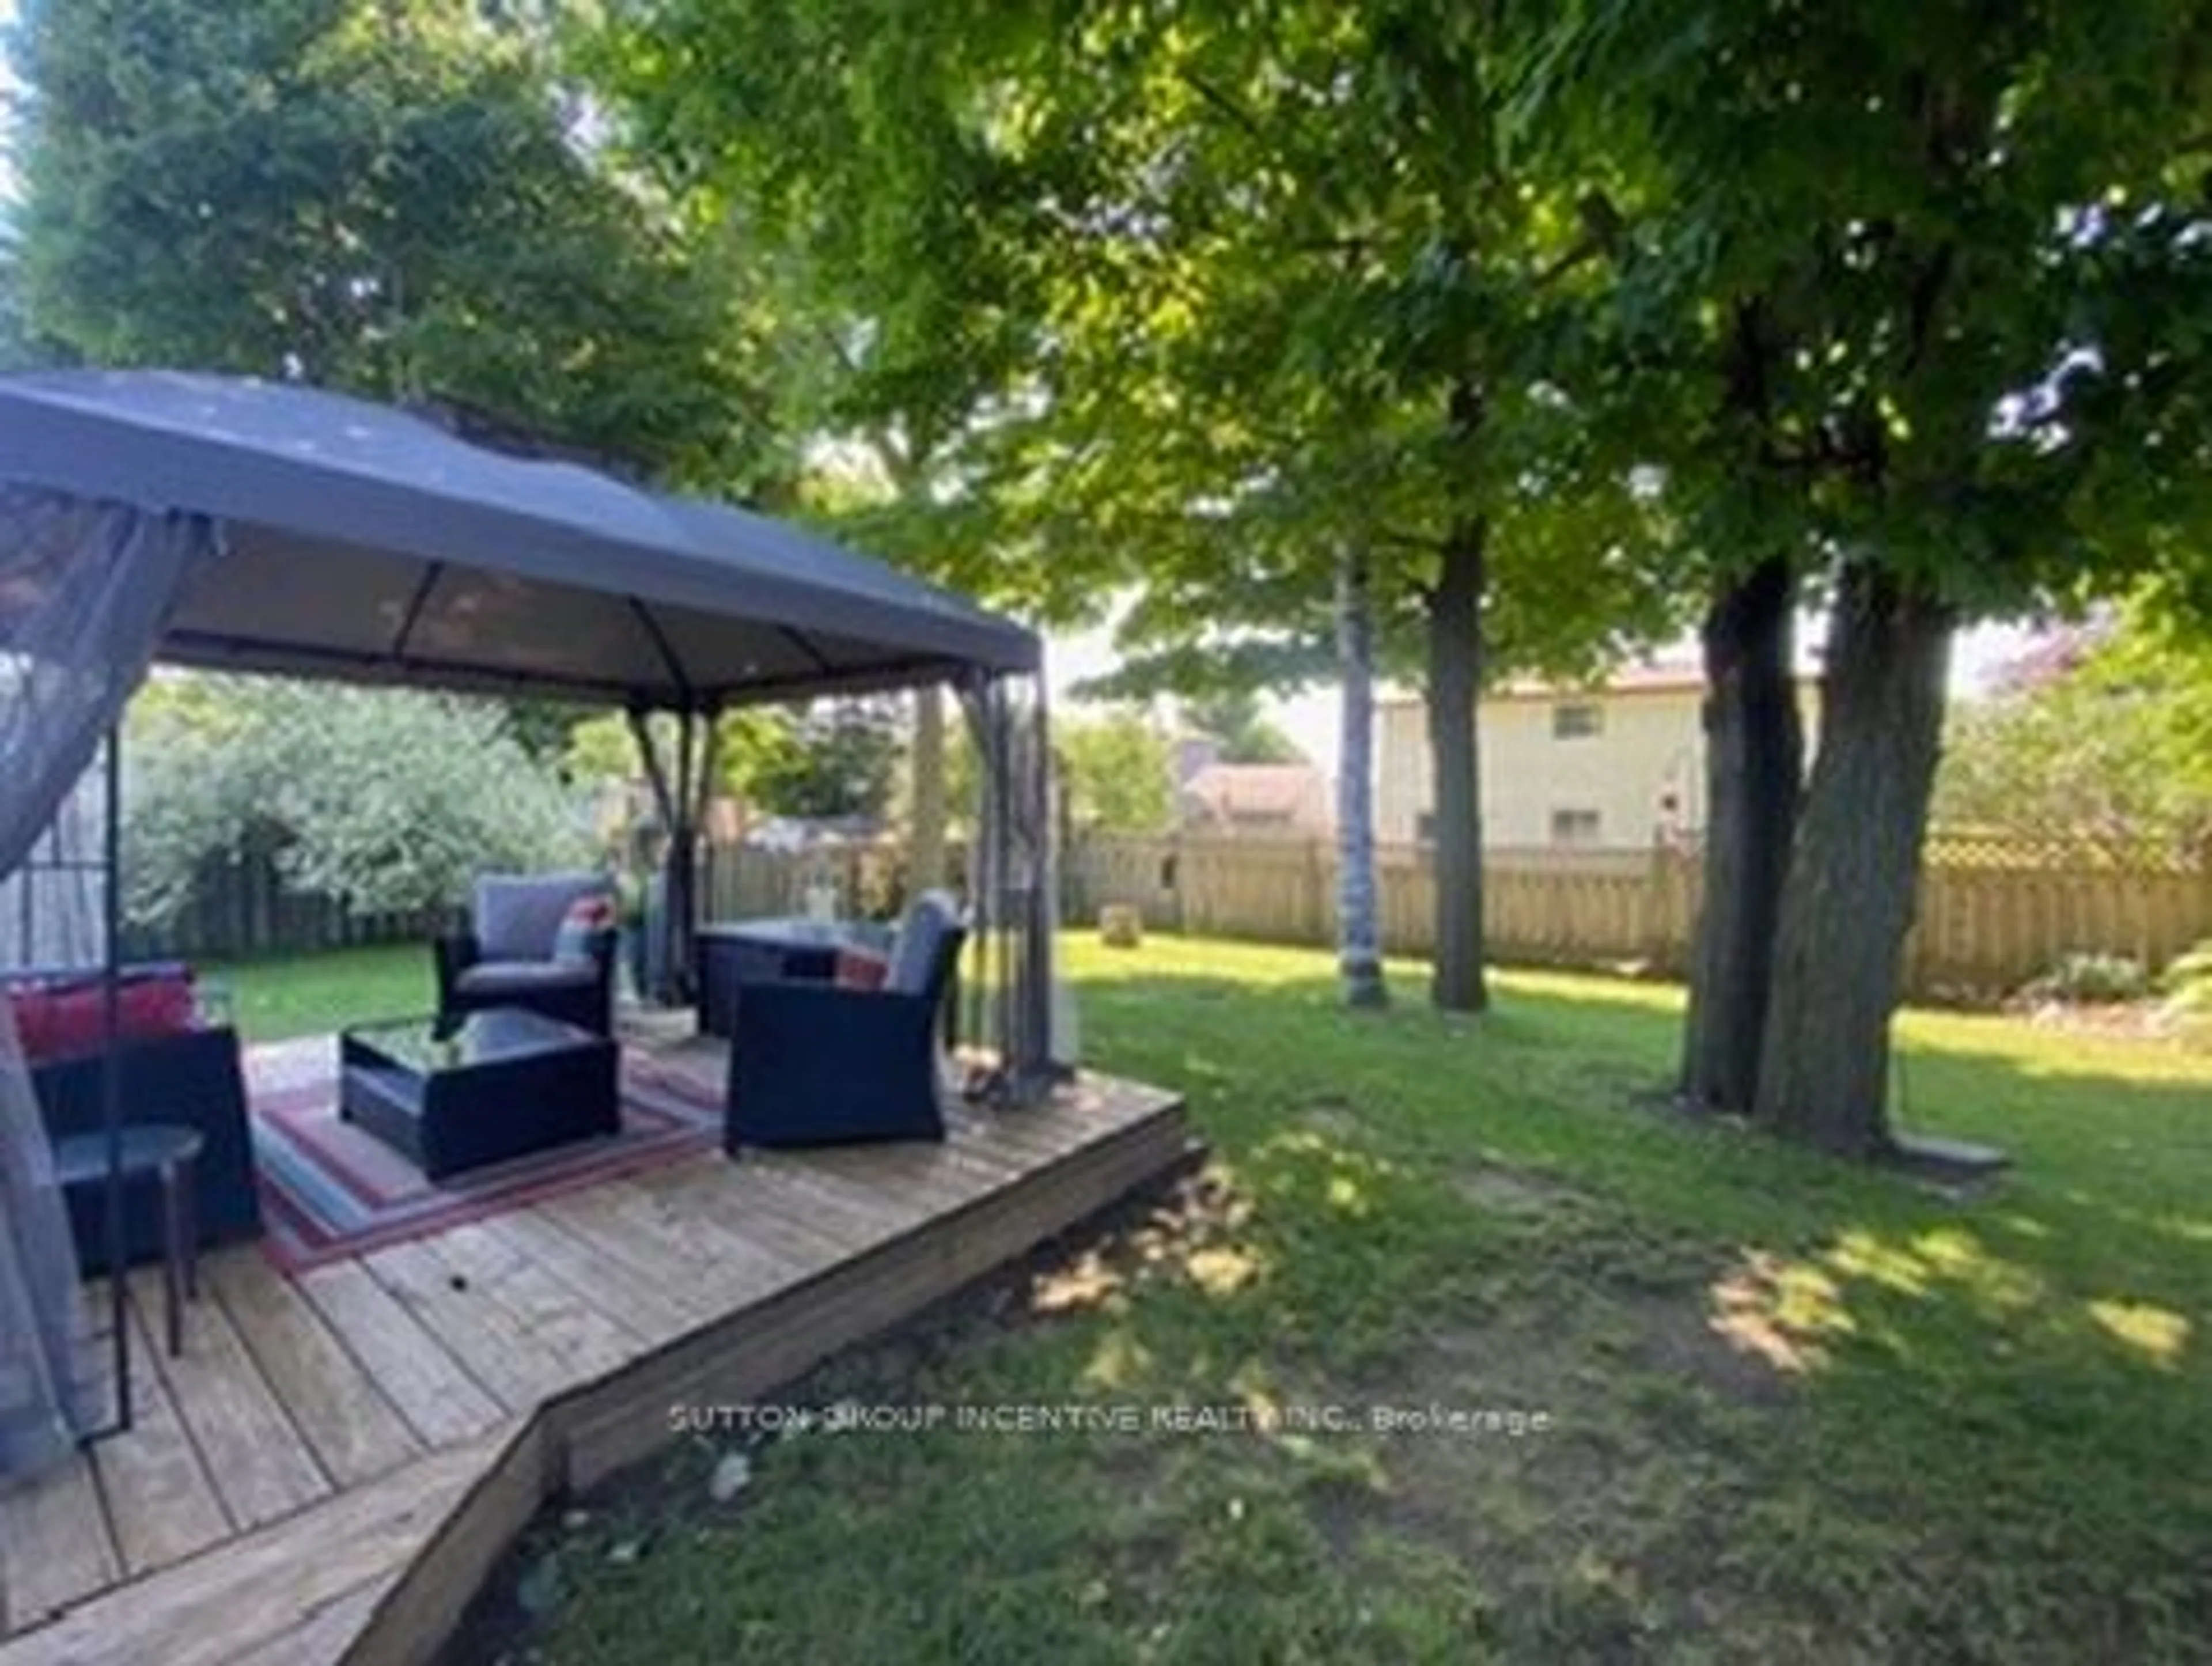 Patio for 255 Chain Gate Dr, Midland Ontario L4R 4S4